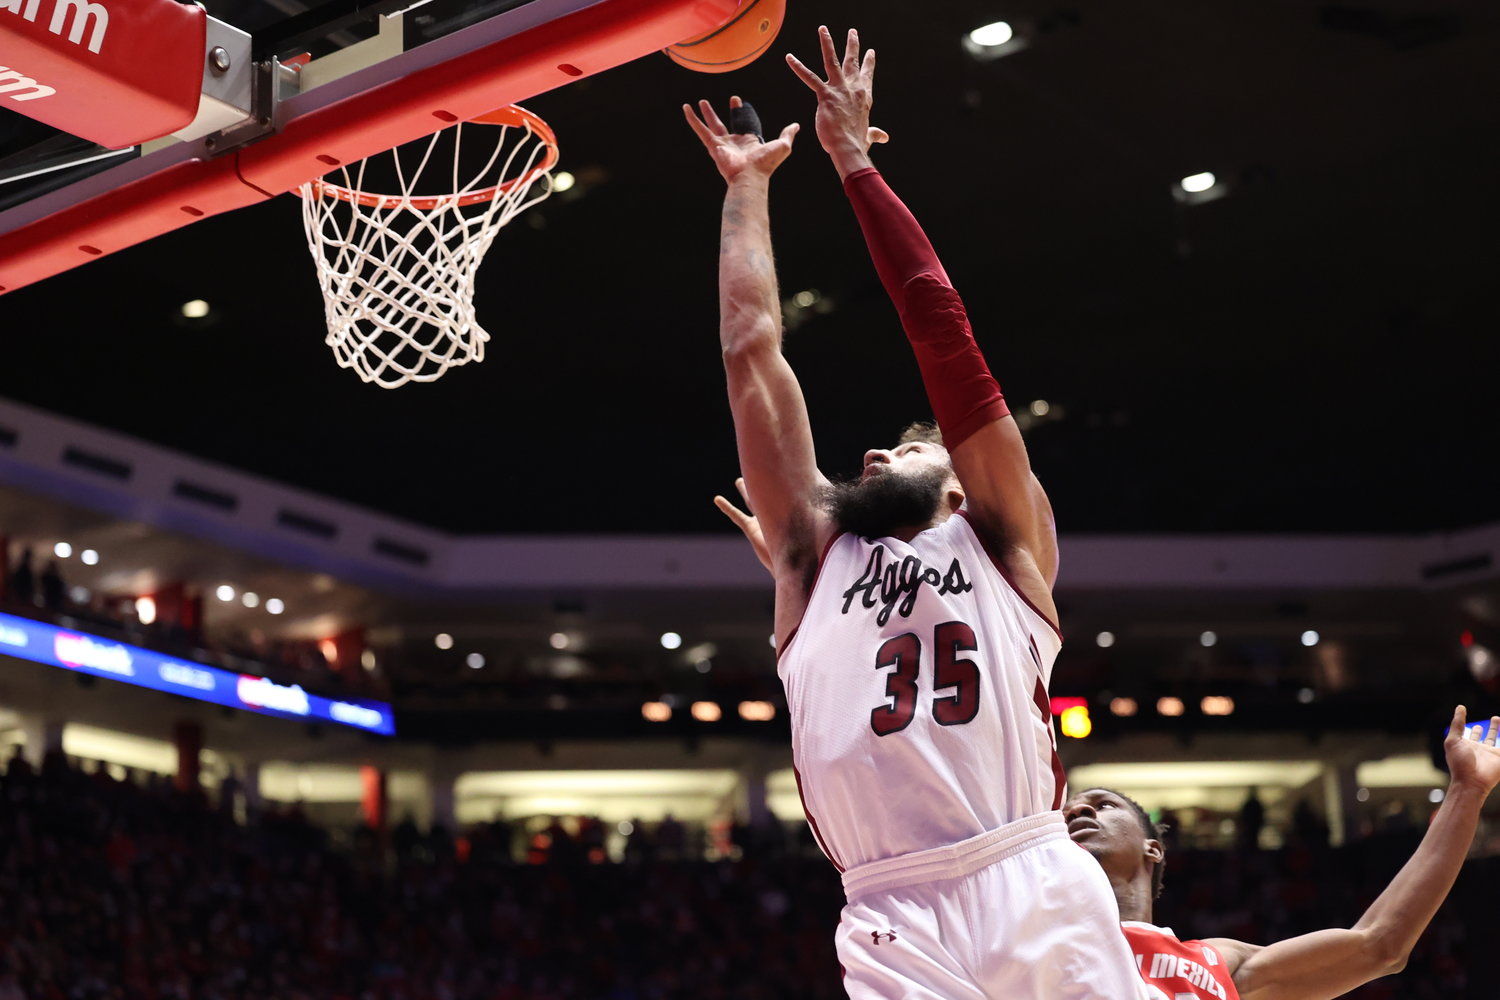 New Mexico State University’s Johnny McCants grabs a rebound against the University of New Mexico Dec. 6 in The Pit in Albuquerque.